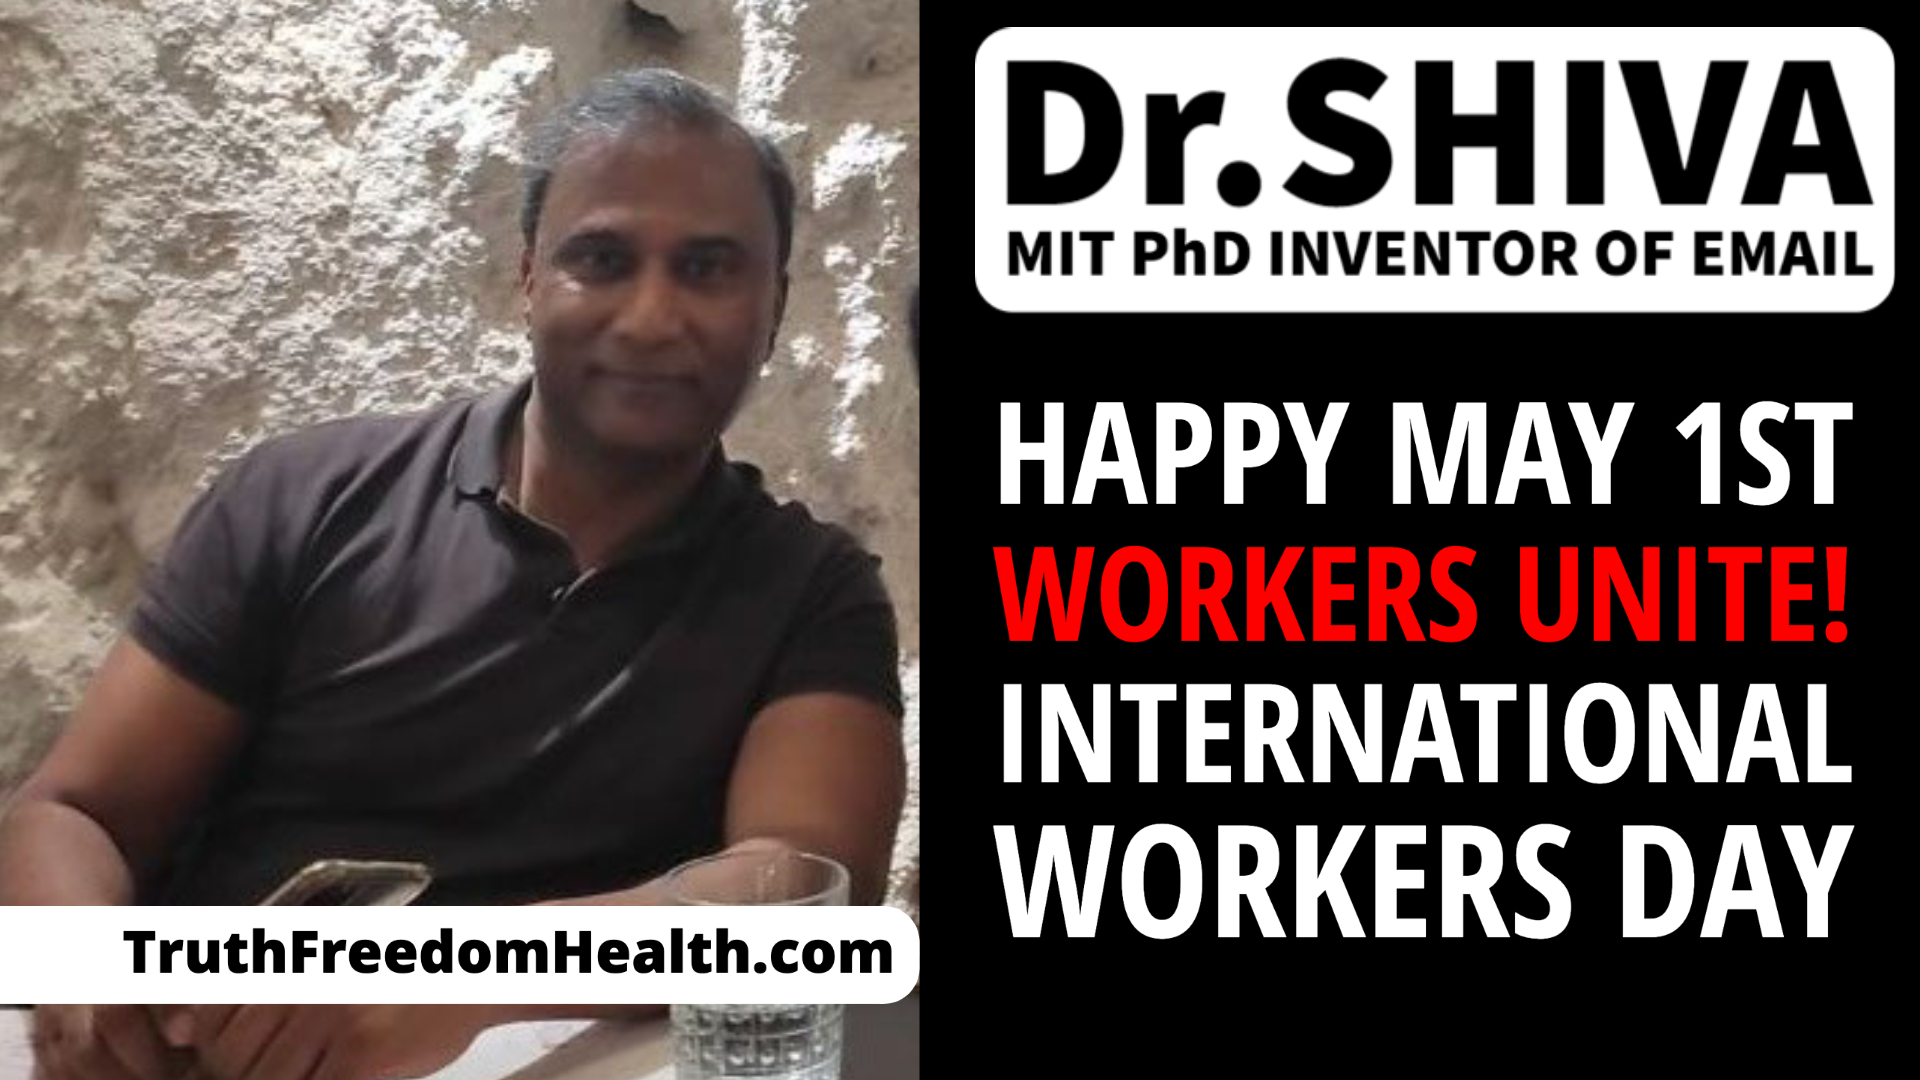 Dr.SHIVA LIVE: Happy May 1st - WORKERS UNITE! International Workers Day